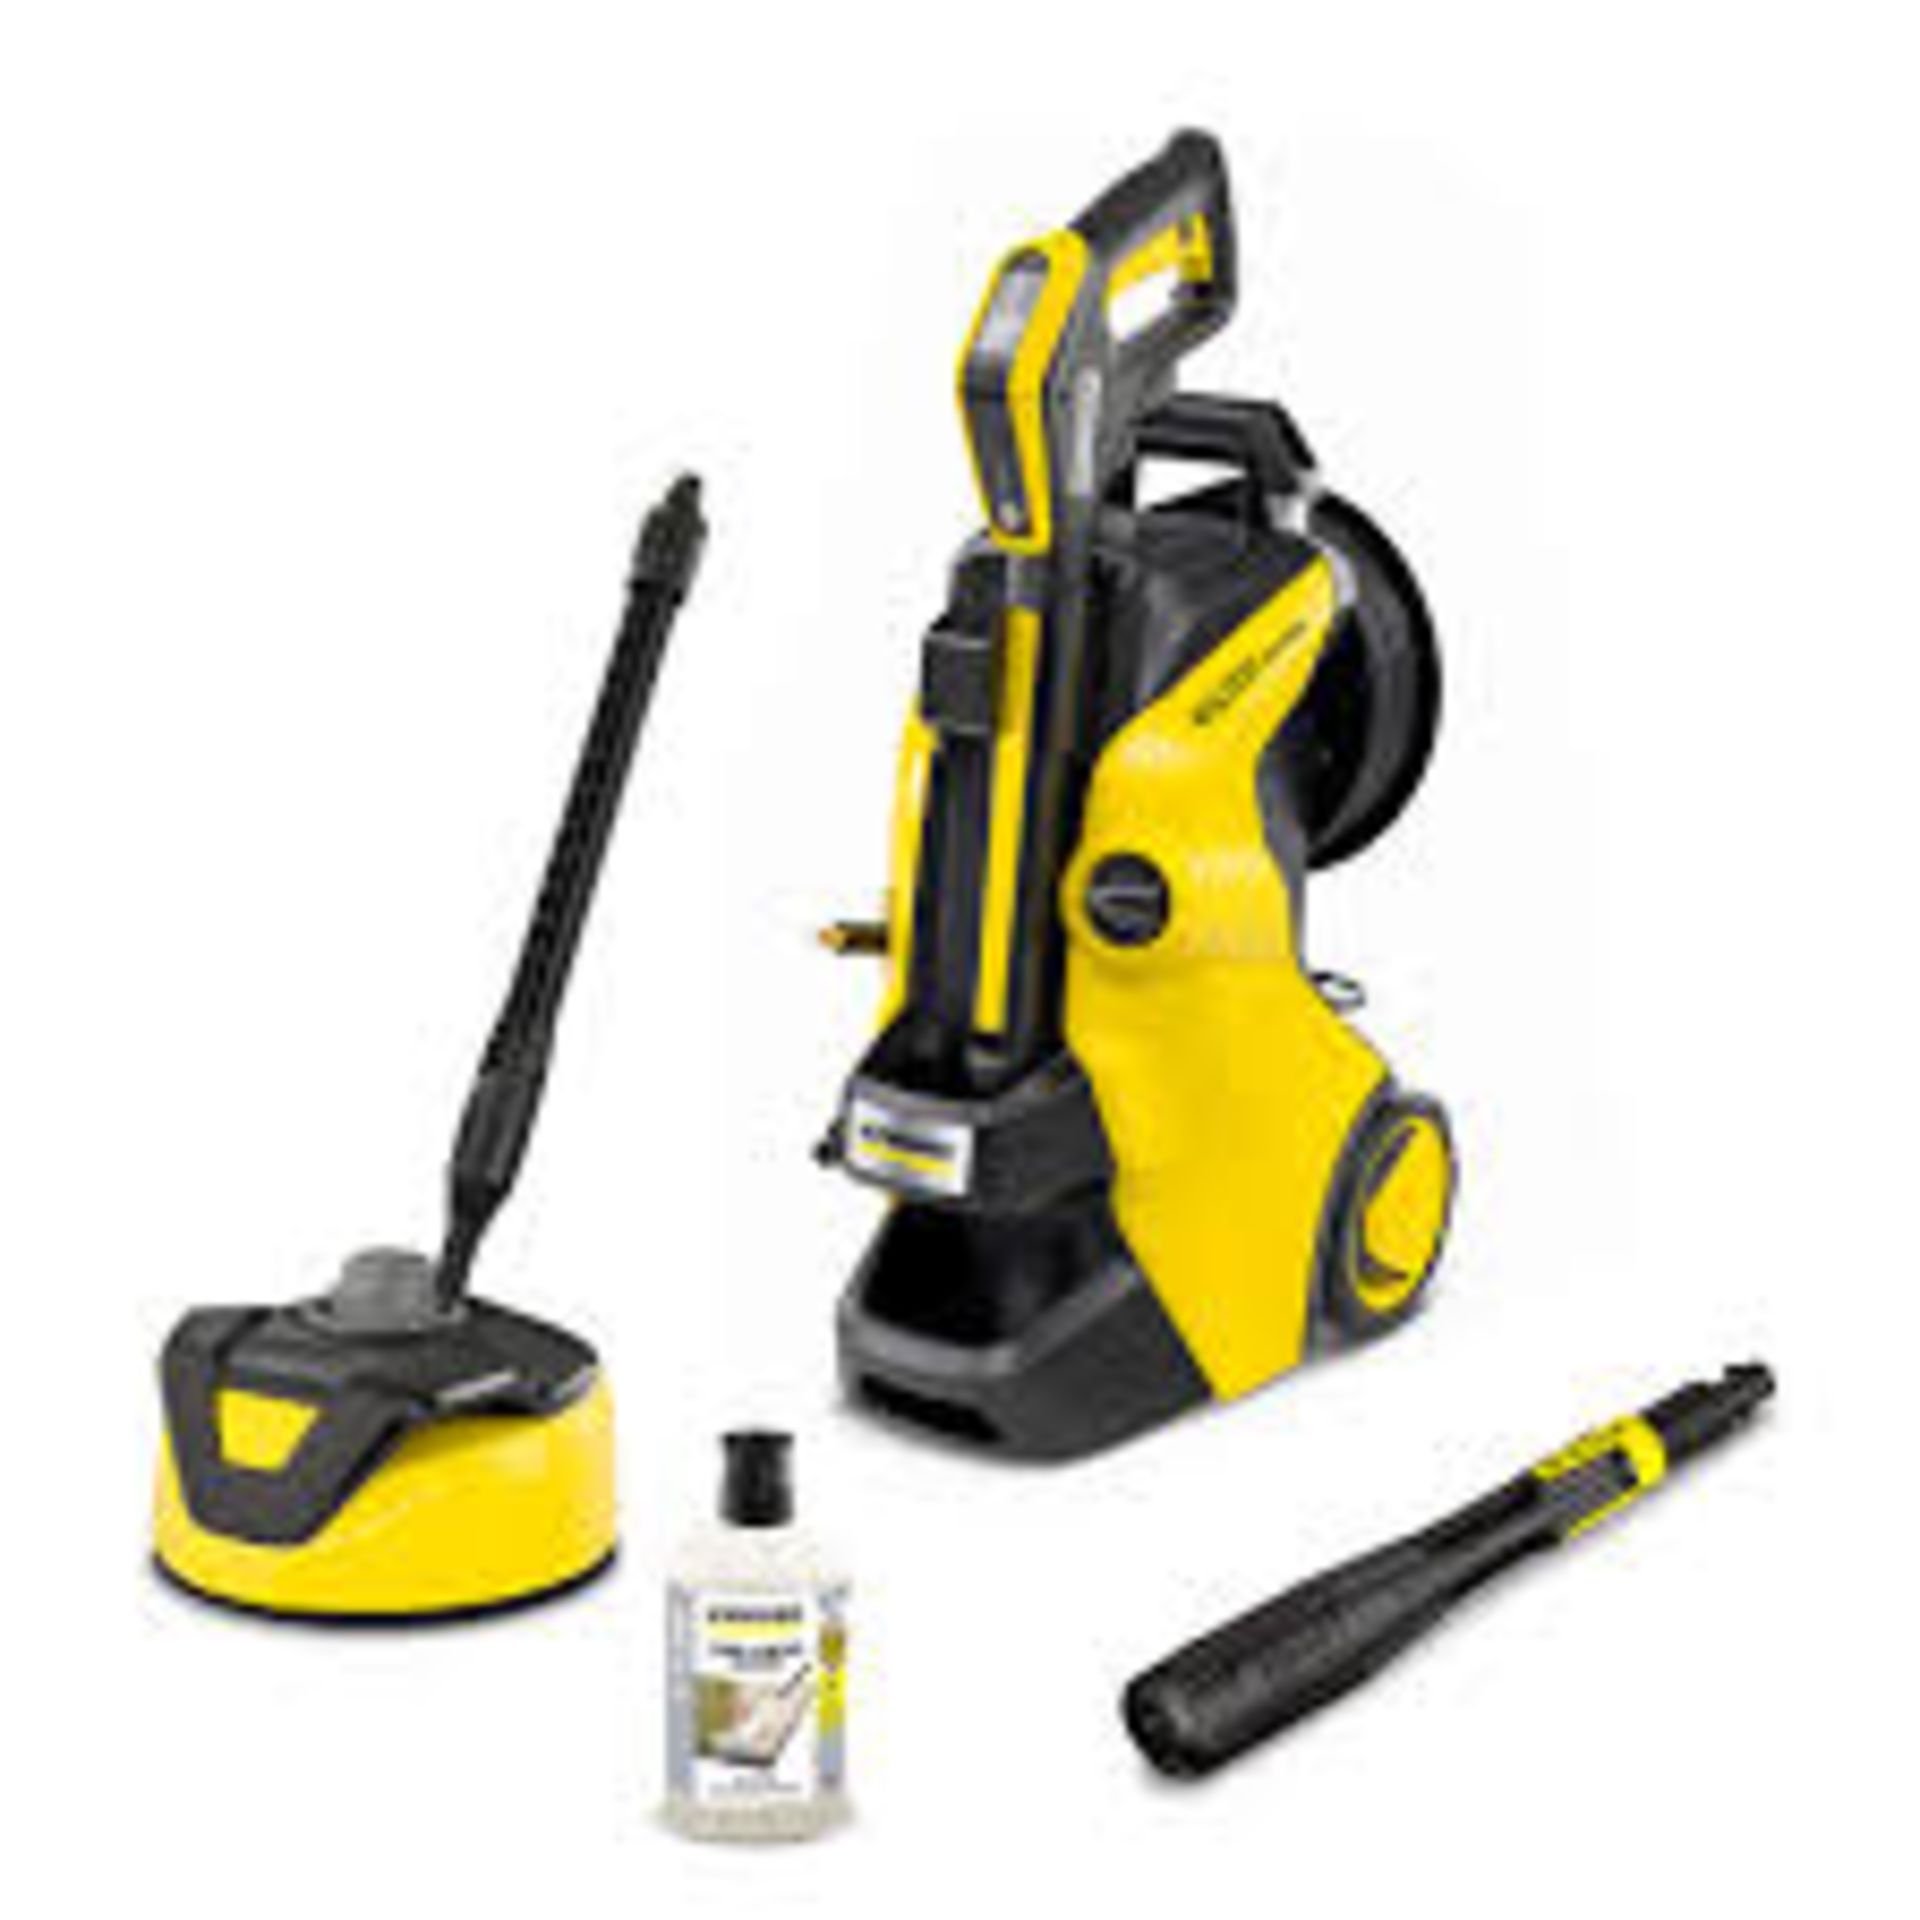 Kärcher K 5 Premium Smart Control Home high pressure washer: - P3. No matter what you are cleaning